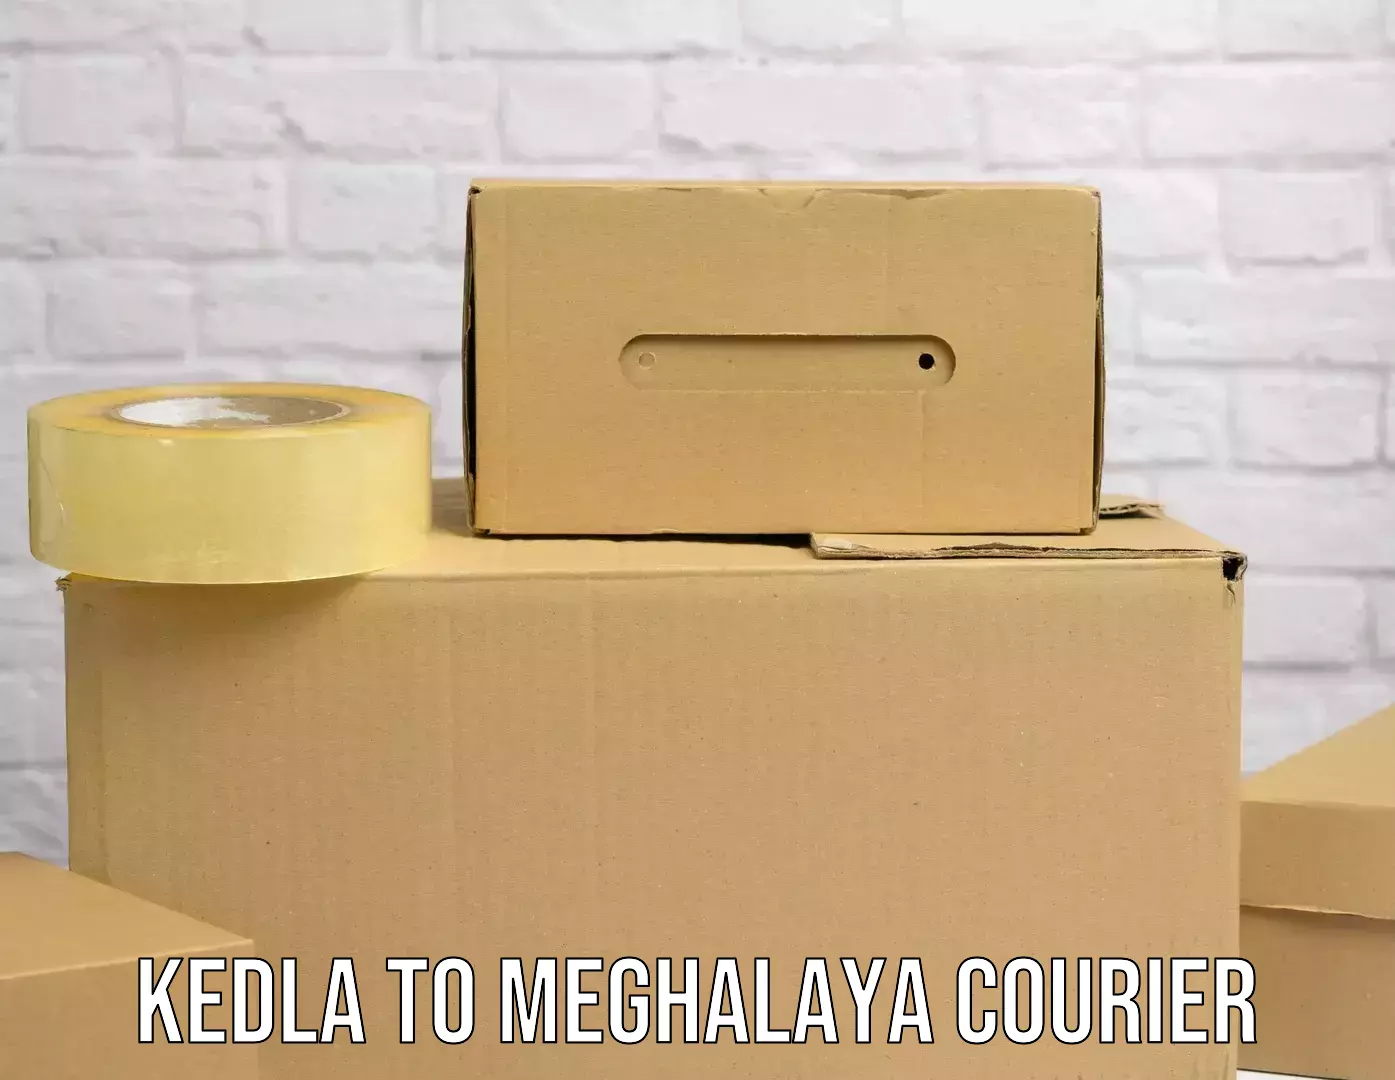 Professional courier services Kedla to Meghalaya